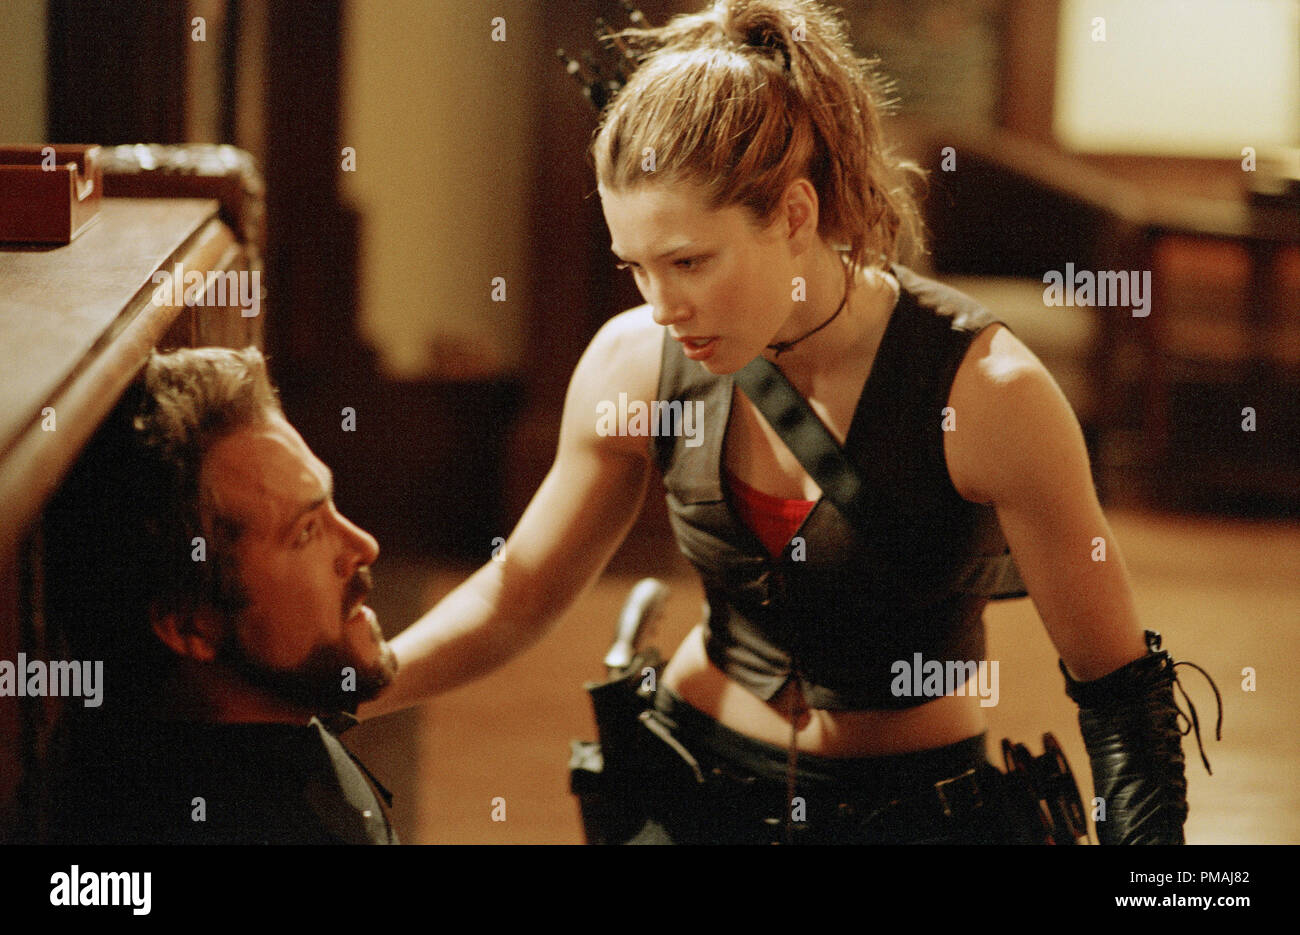 Jessica Biel Blade Trinity Blade High Resolution Stock Photography And Images Alamy applauds sarcastically the vampire final solution. https www alamy com ryan reynolds left and jessica biel right star in new line cinemas action adventure blade trinity 2004 image219051394 html